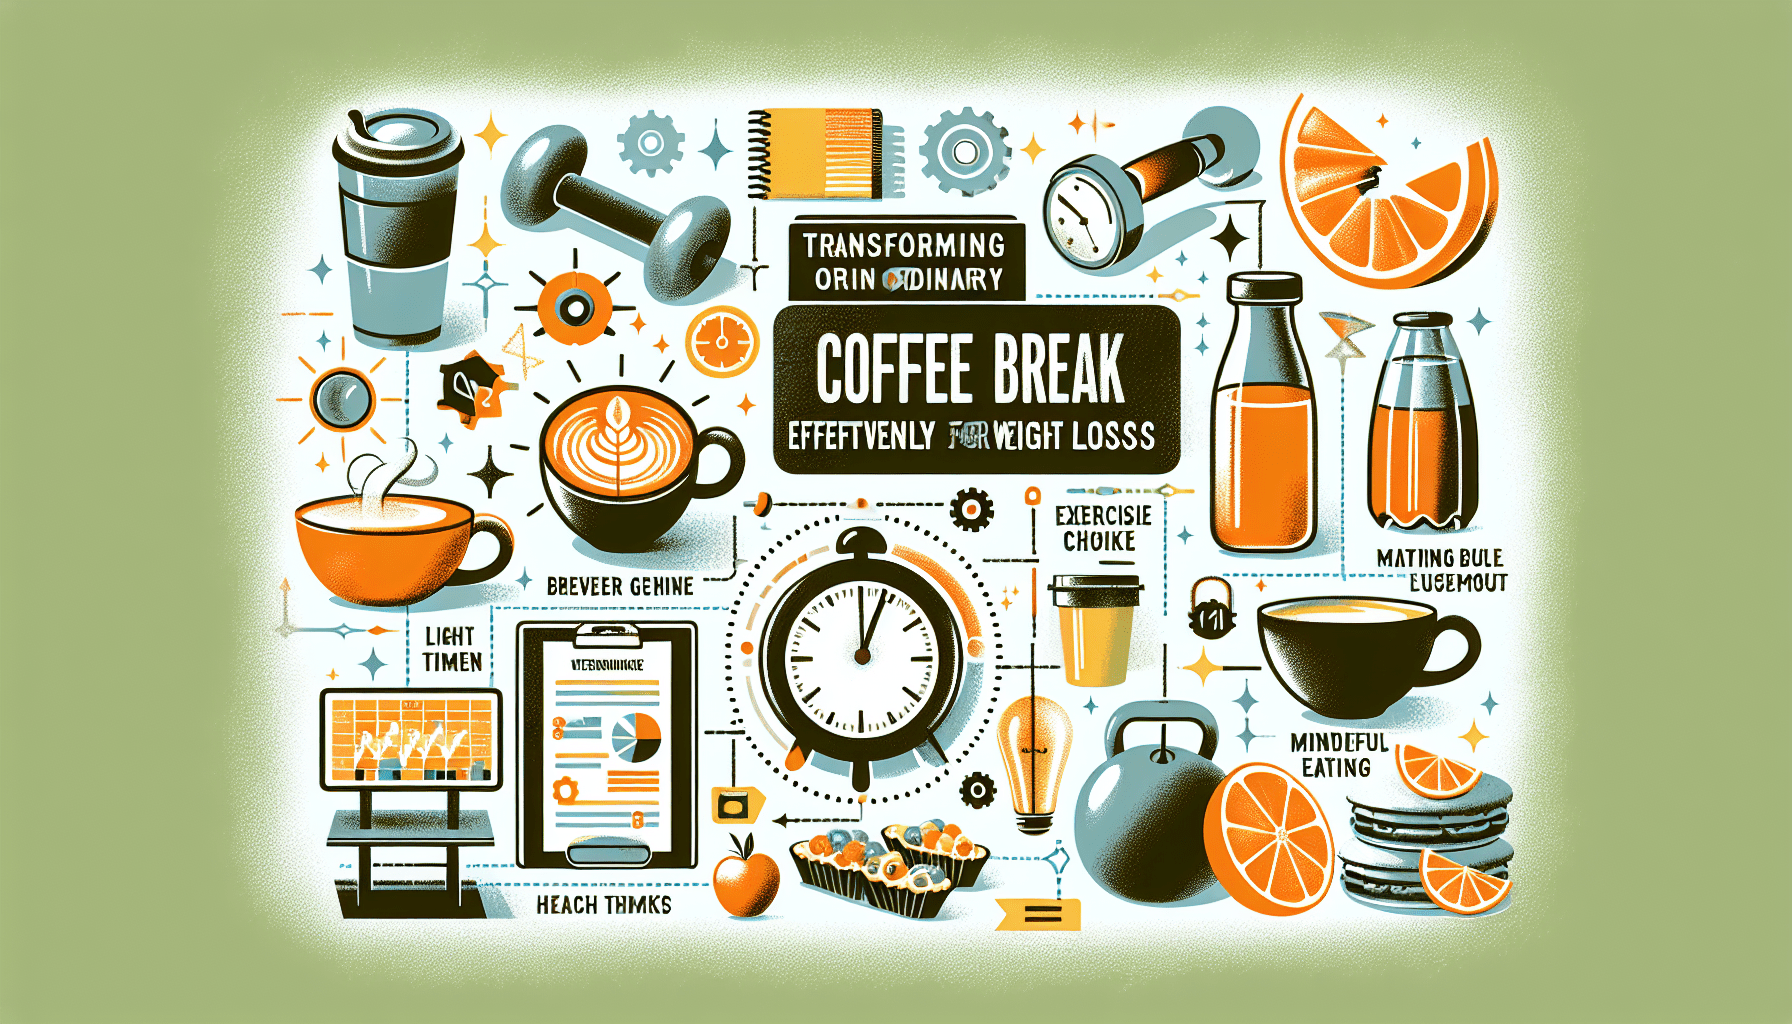 How To Turn Your Coffee Break Into A Weight Loss Moment